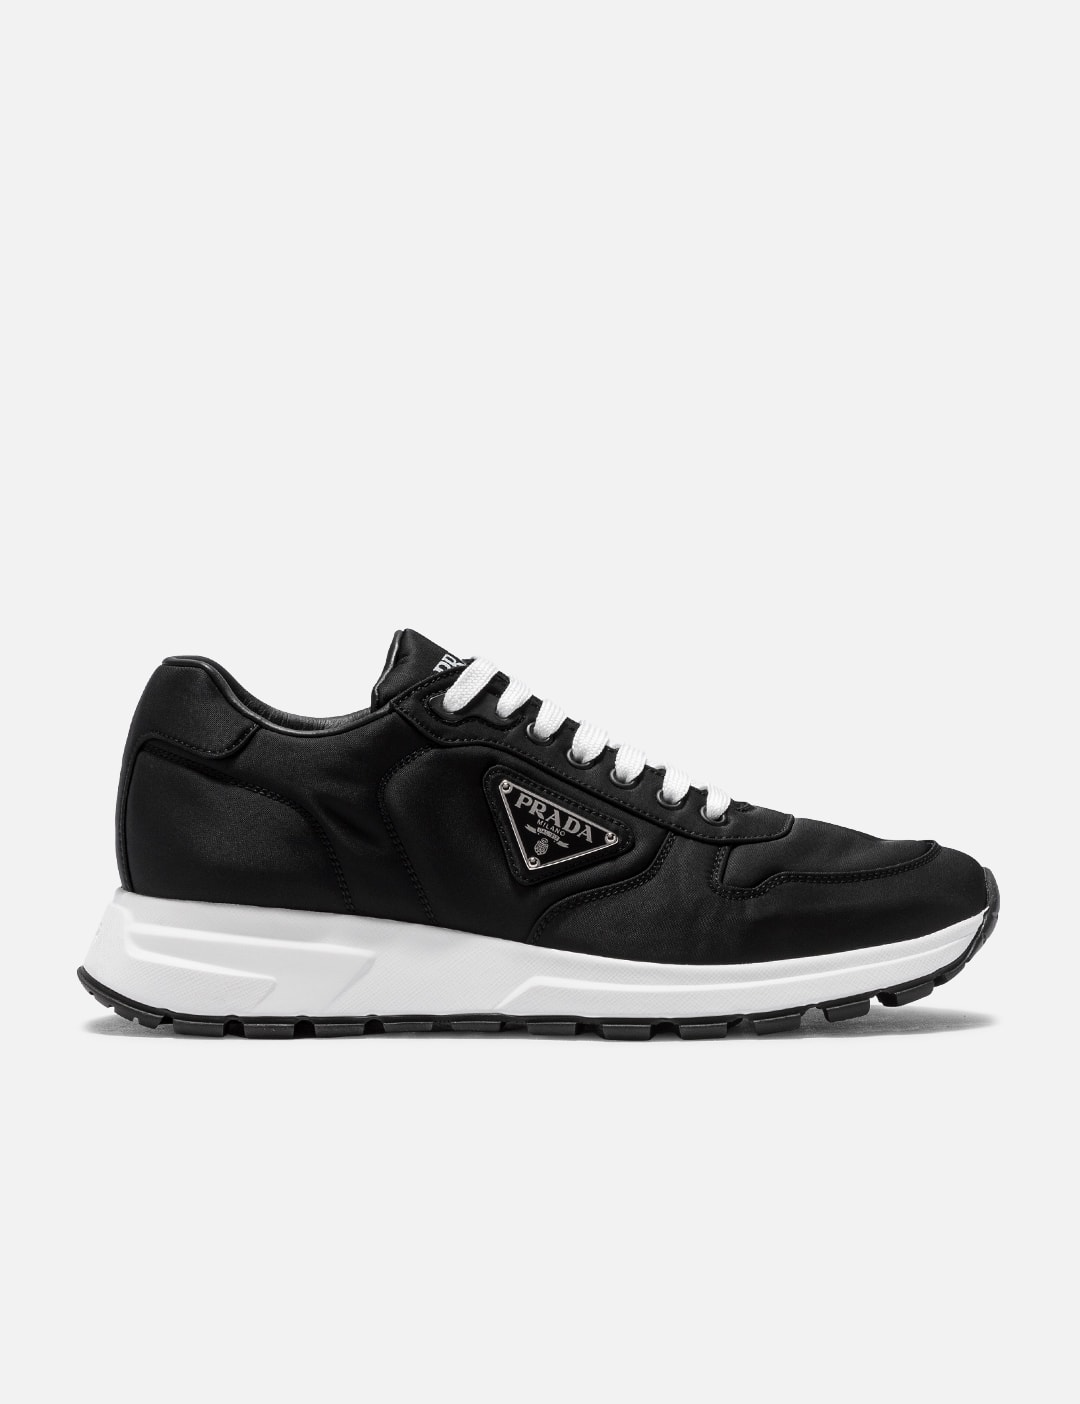 Prada - NYLON RUNNERS | HBX - Globally Curated Fashion and Lifestyle by ...